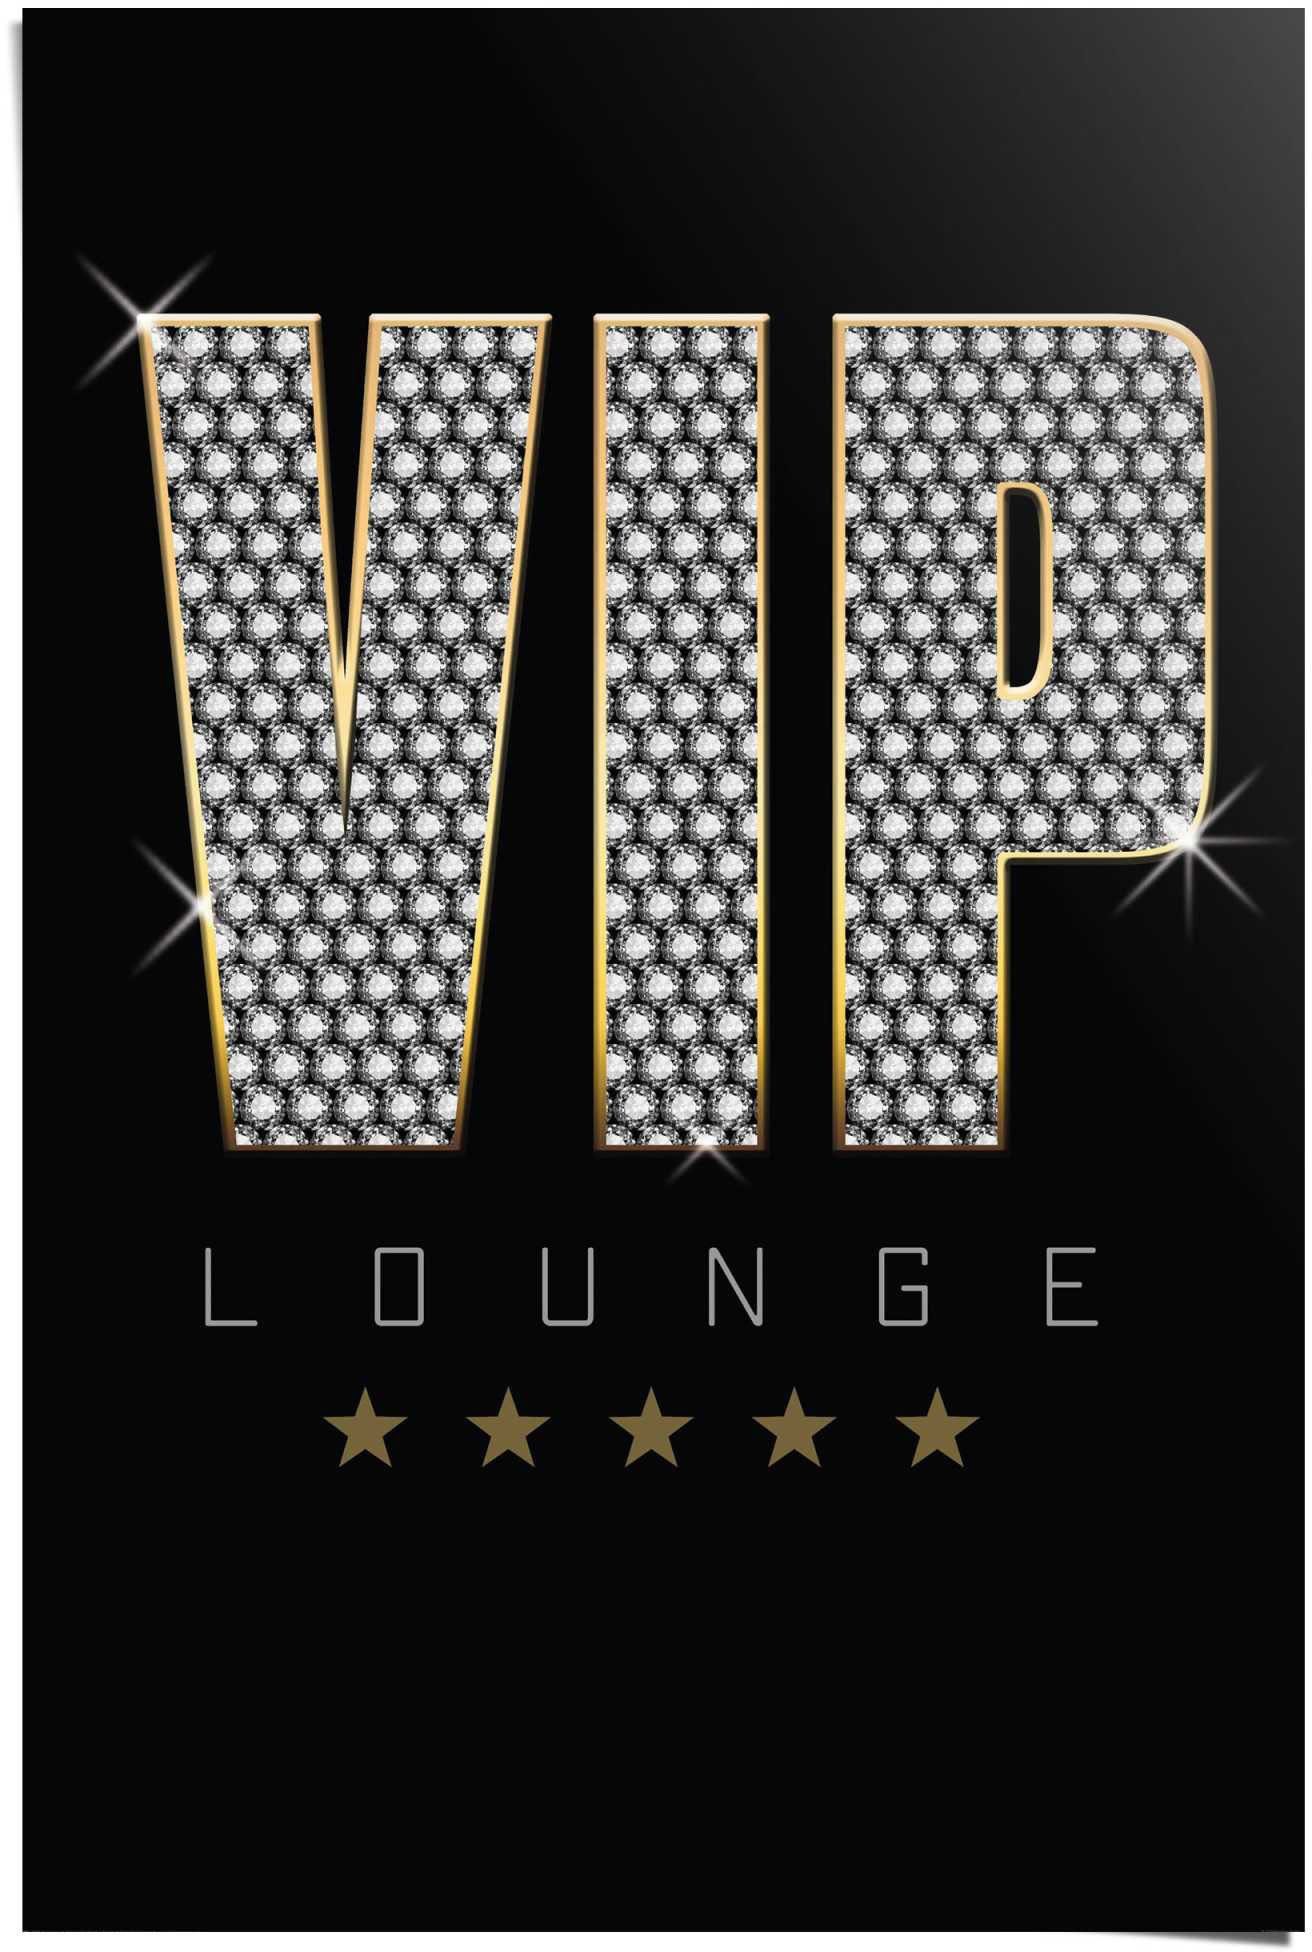 St) Reinders! (1 Lounge, Vip Poster